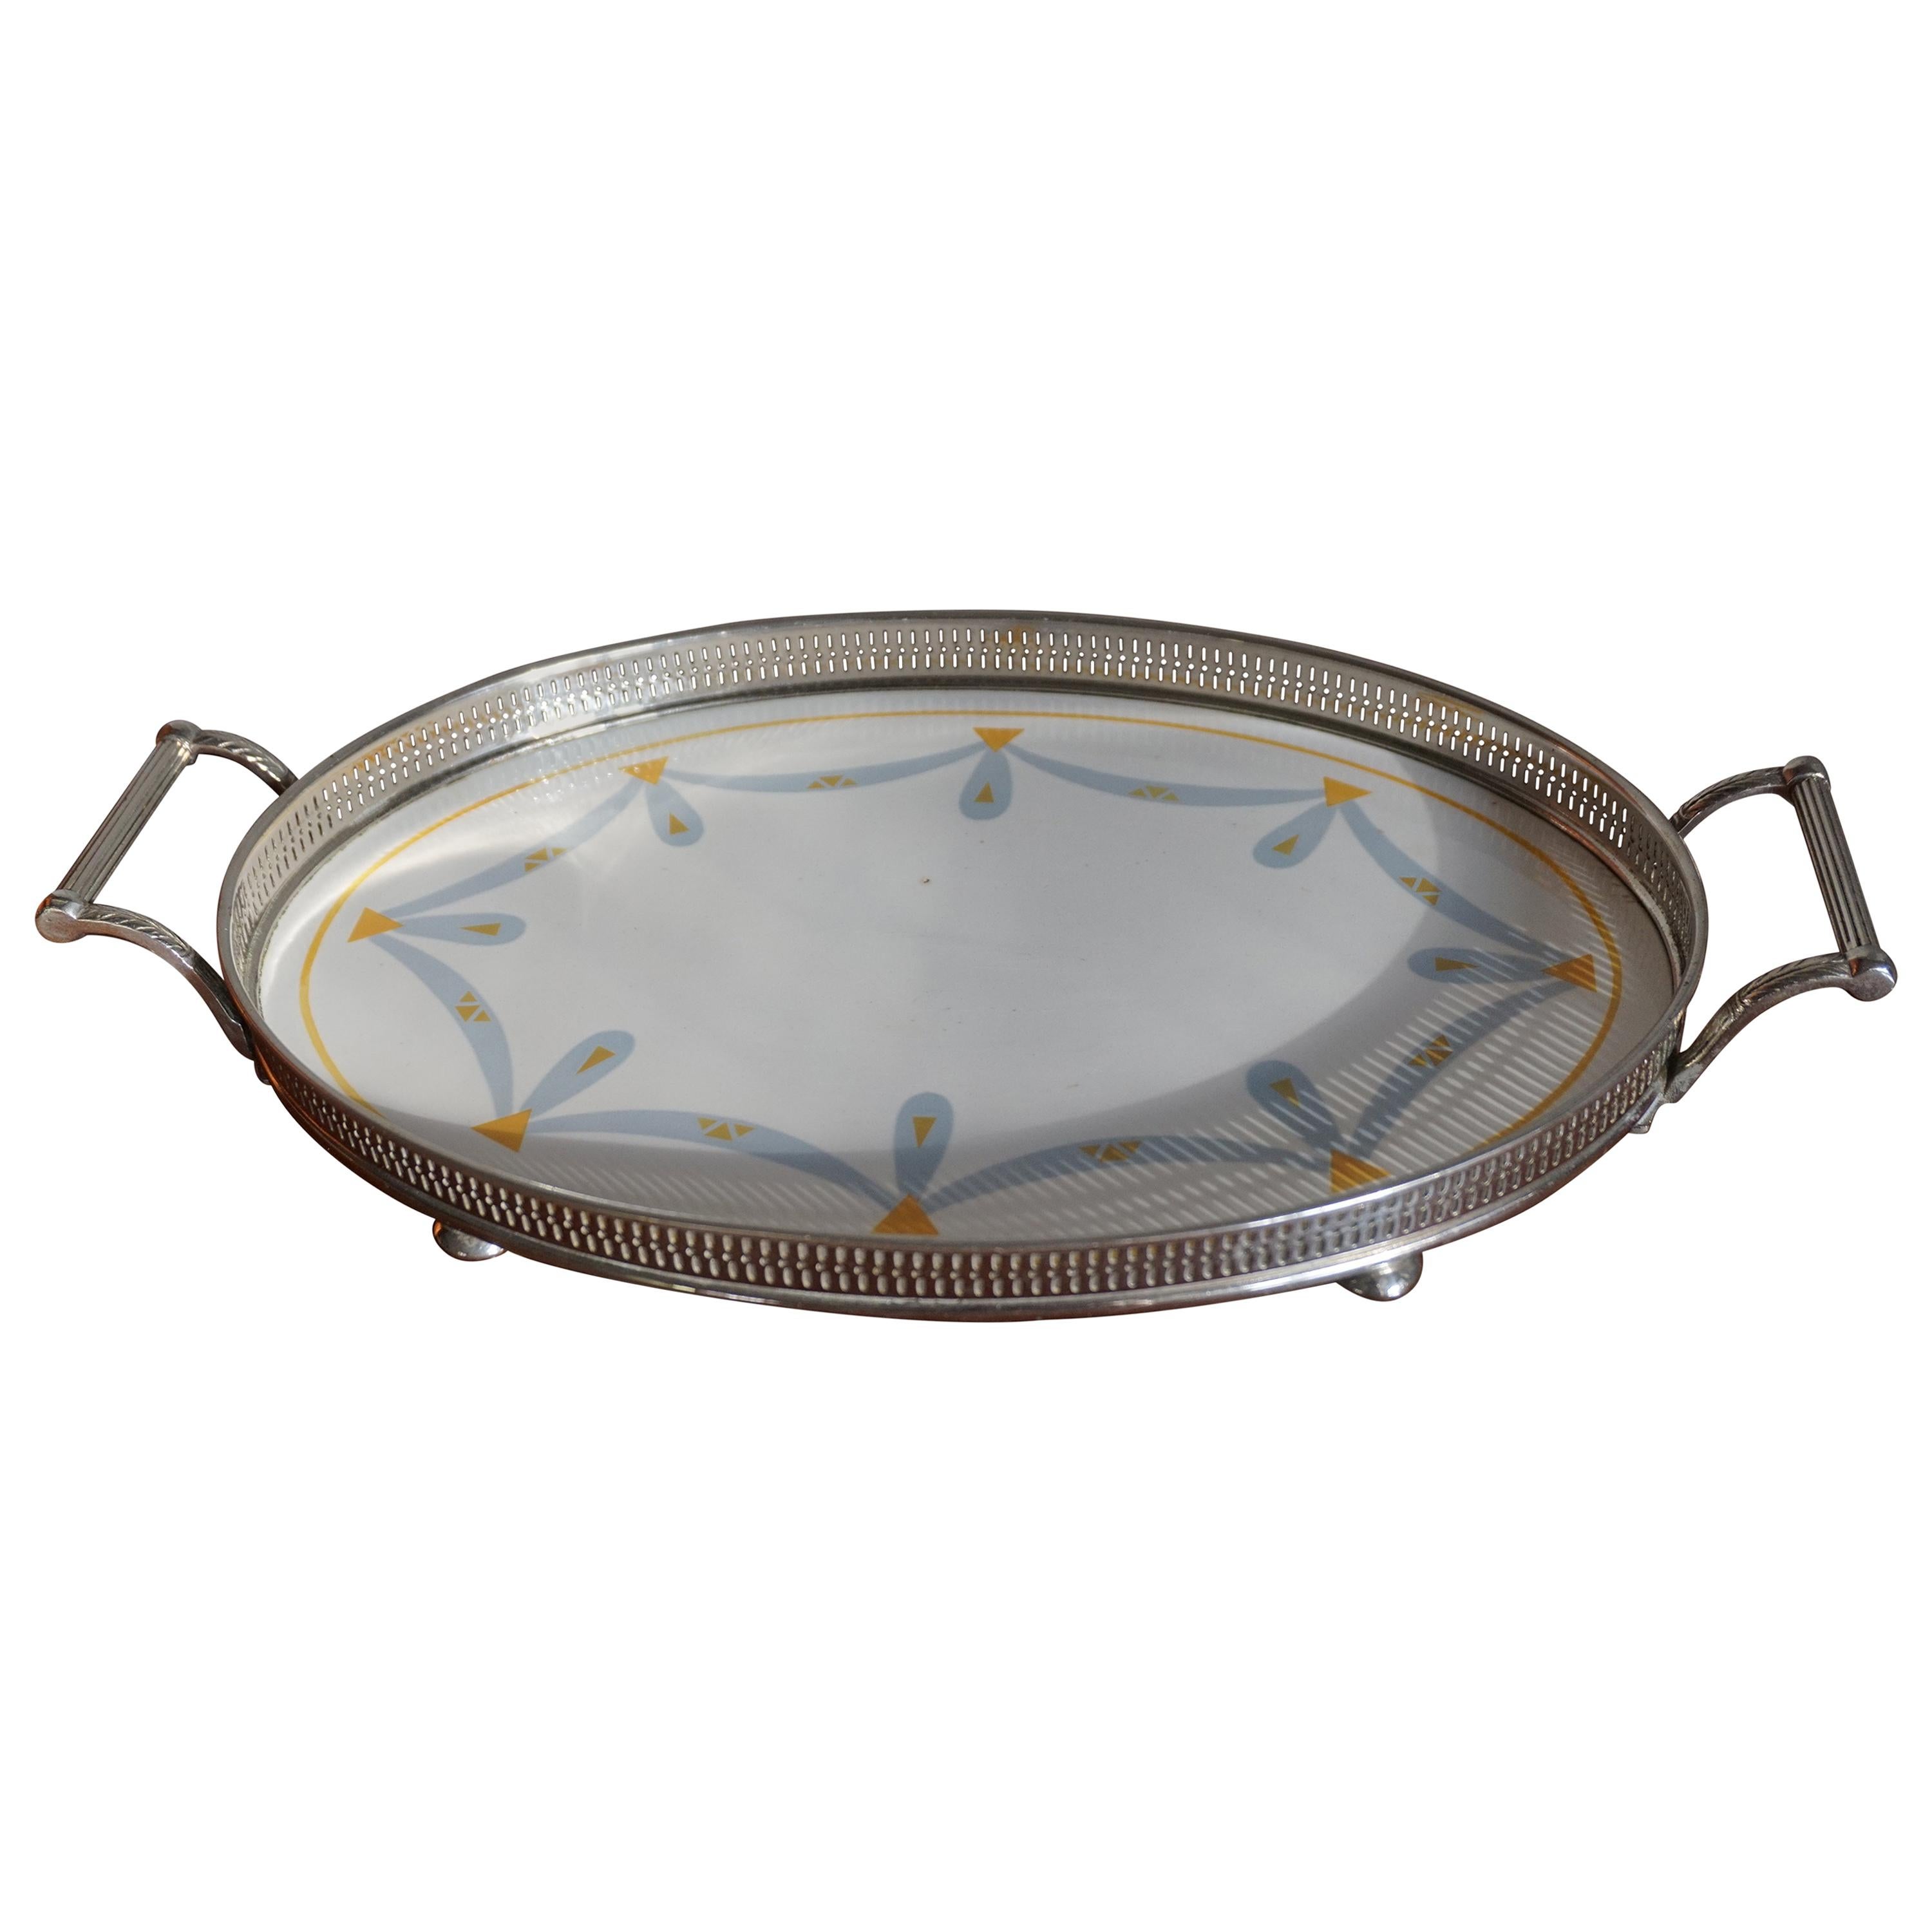 Small Art Deco Oval Porcelain Tile Serving Tray with Stylish Yellow & Gray Motif